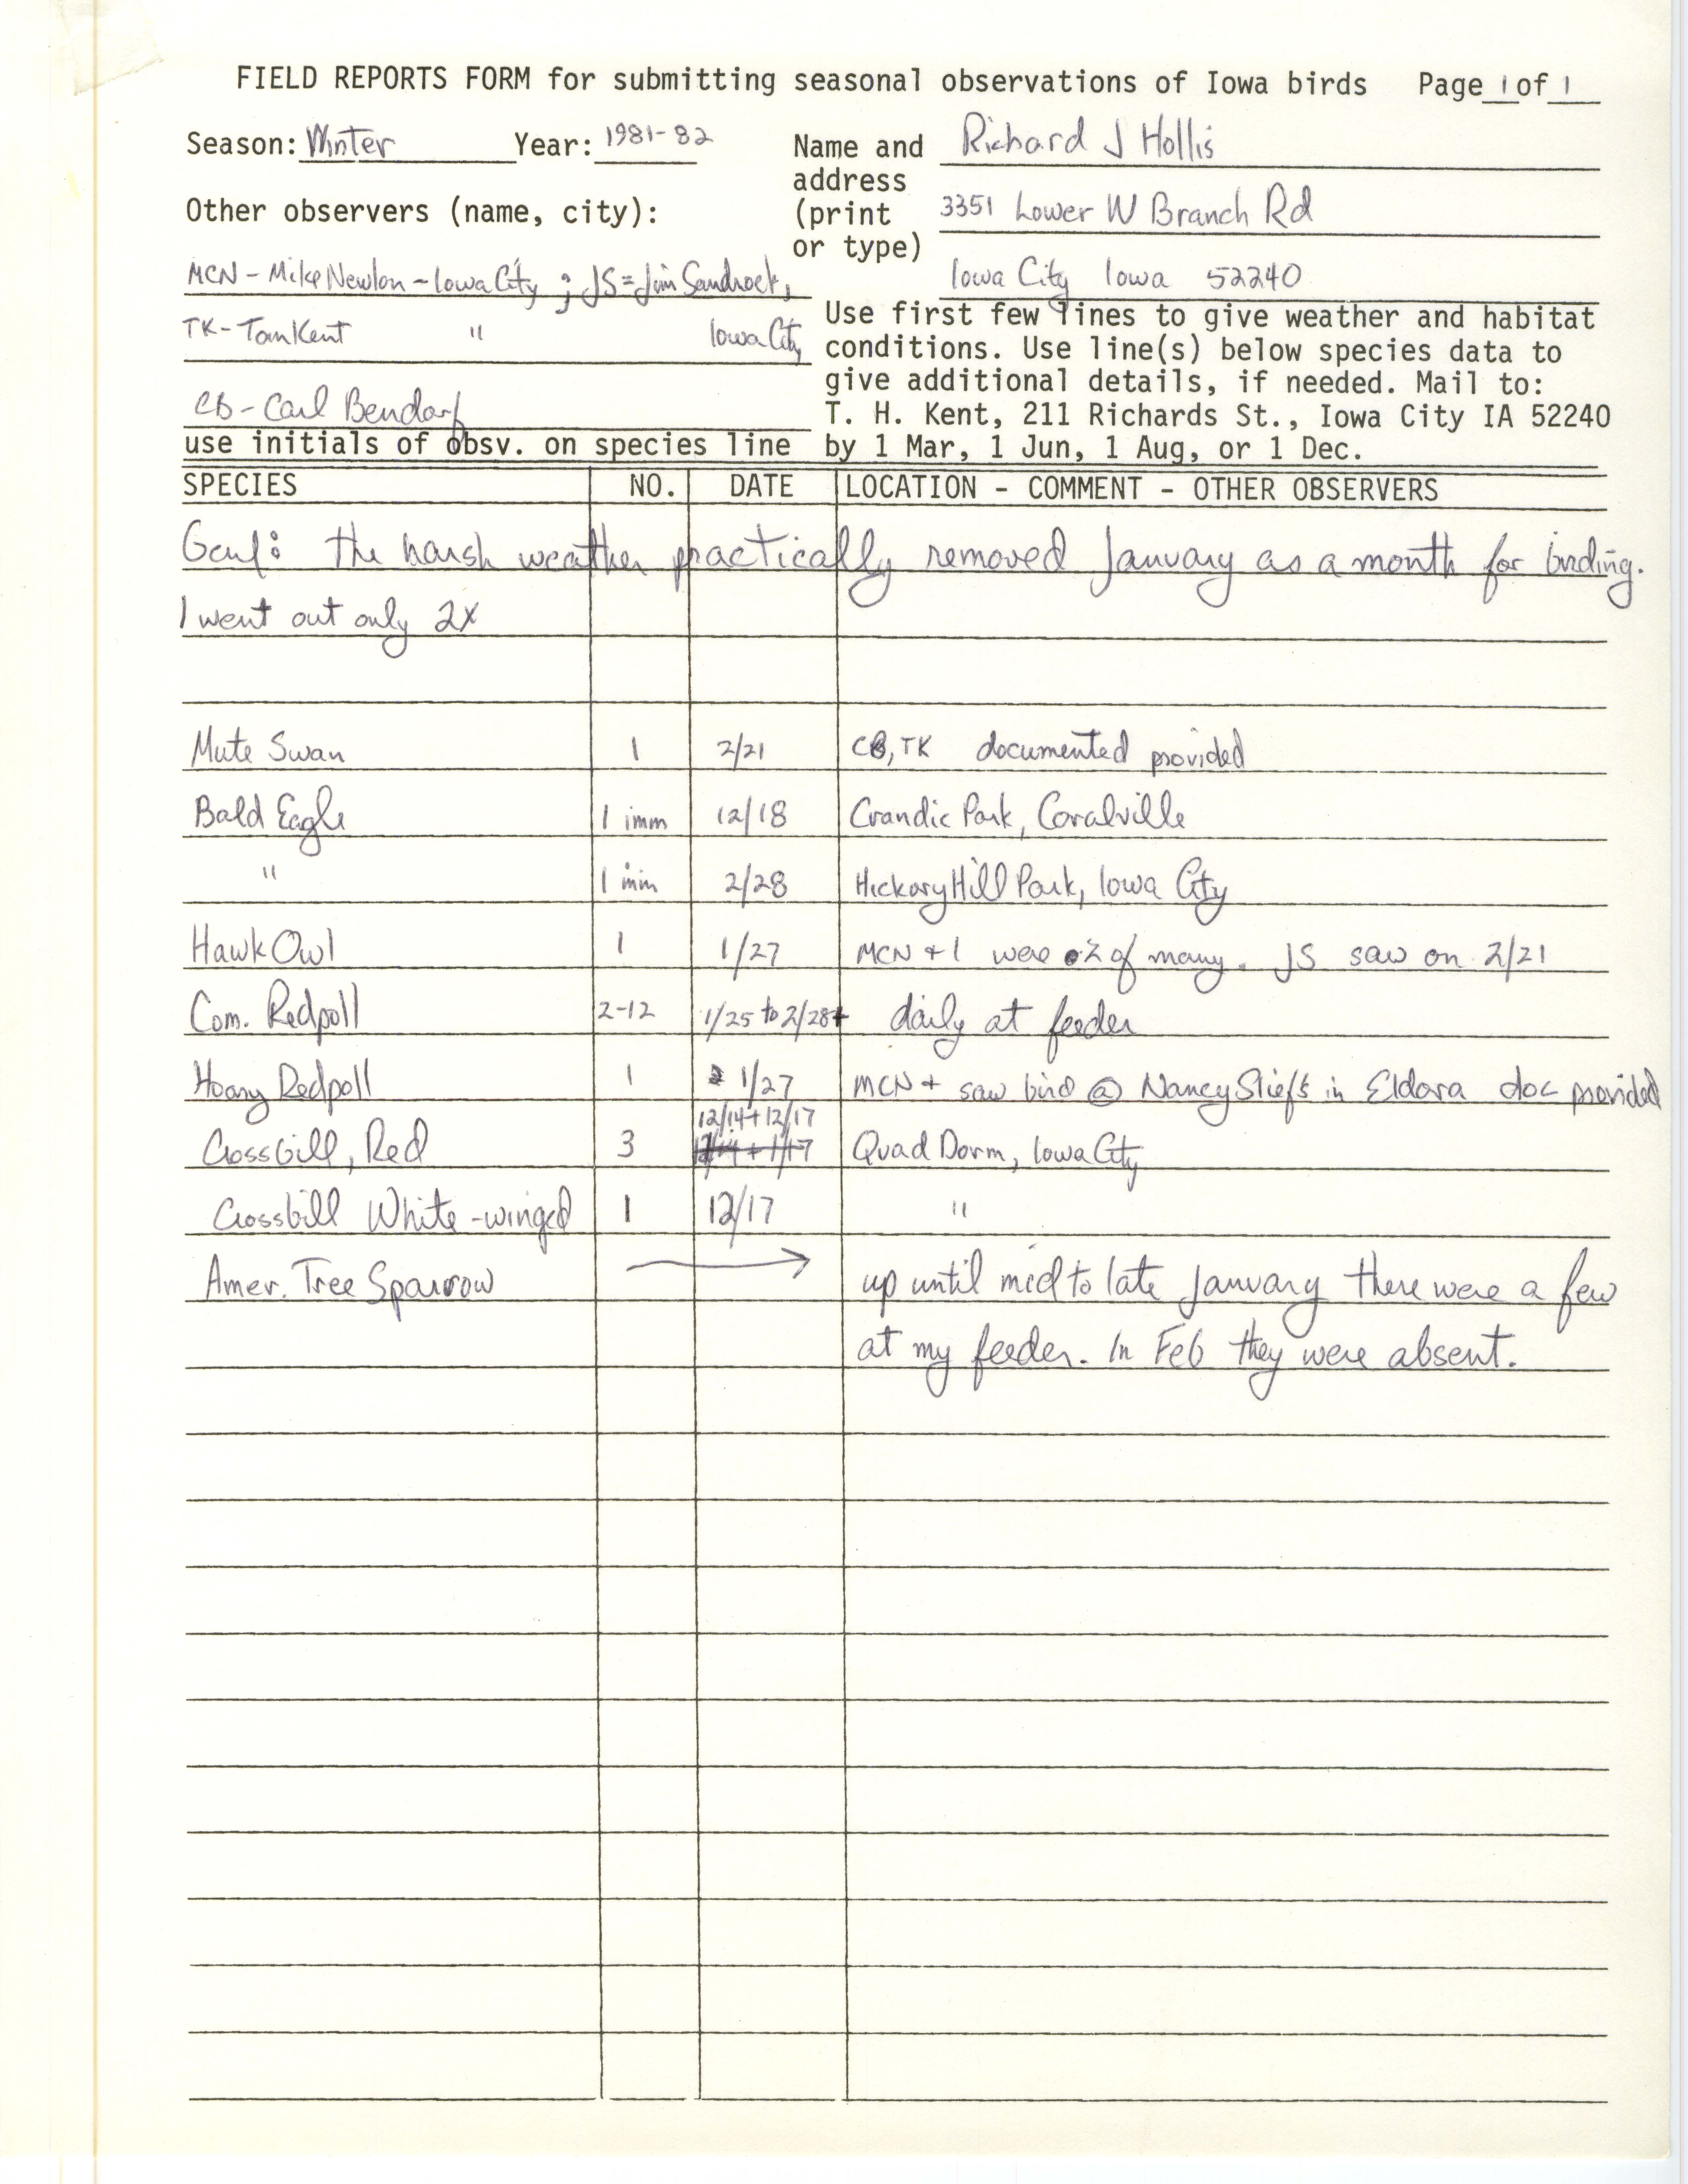 Field notes contributed by Richard Jule Hollis, winter 1981-1982